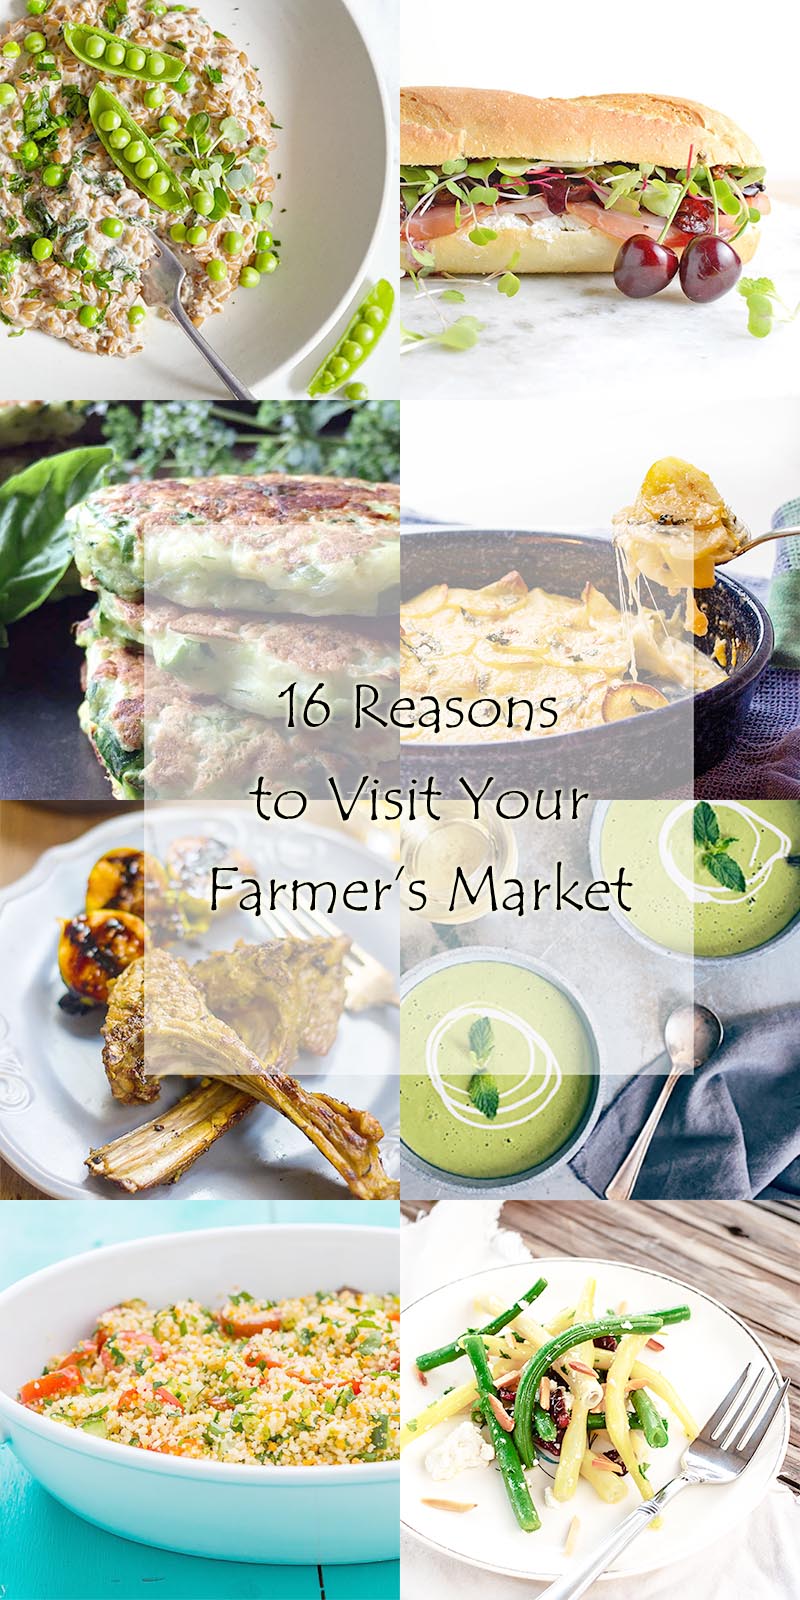 Farmer's Market Roundup - This roundup features 16 wonderful and tasty reasons to visit your local farmer's market and fill up on fresh produce. | justalittlebitofbacon.com